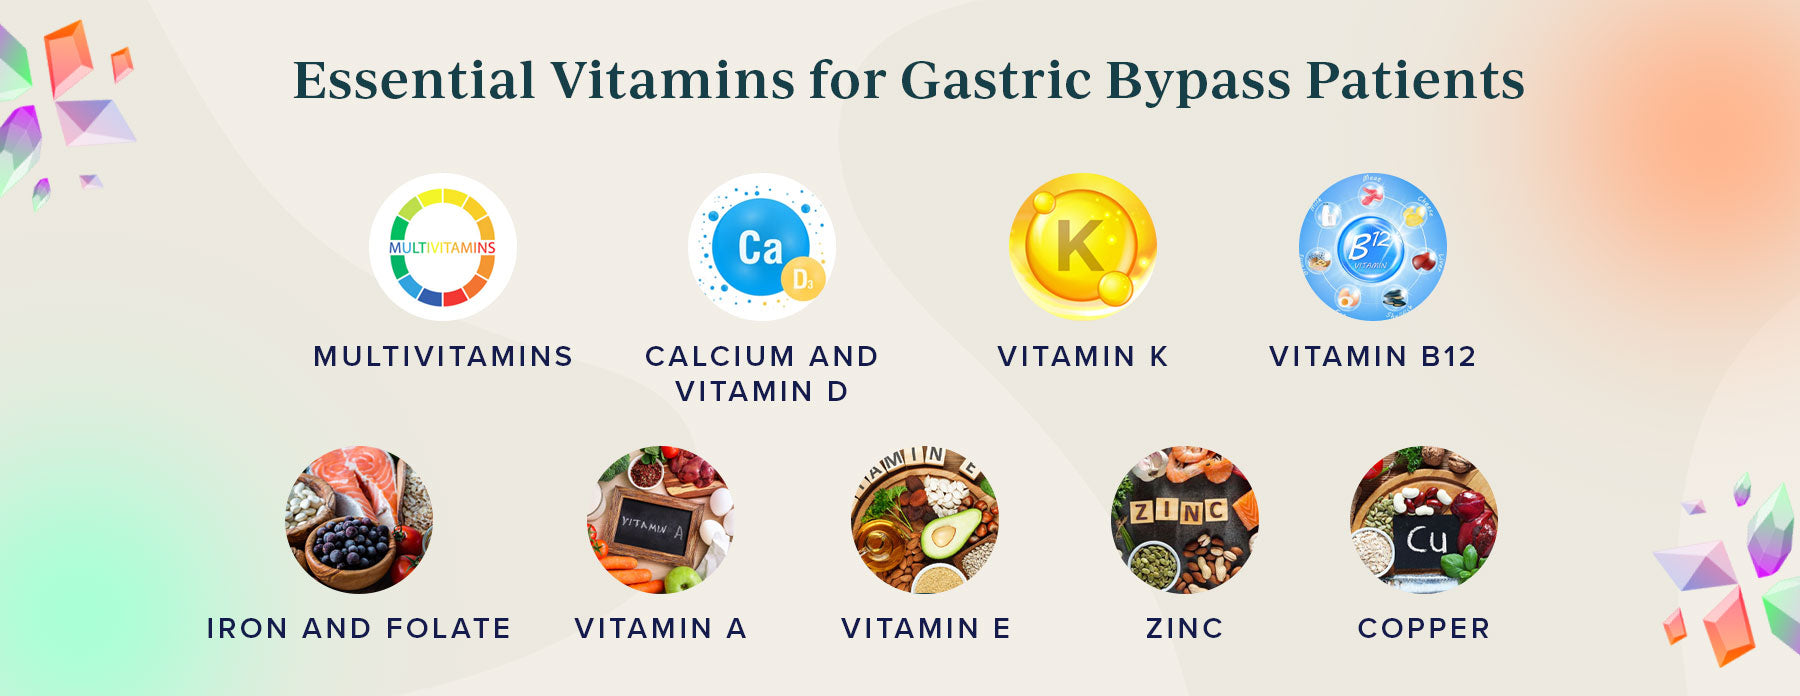 Essential Vitamins for Gastric Bypass Patients